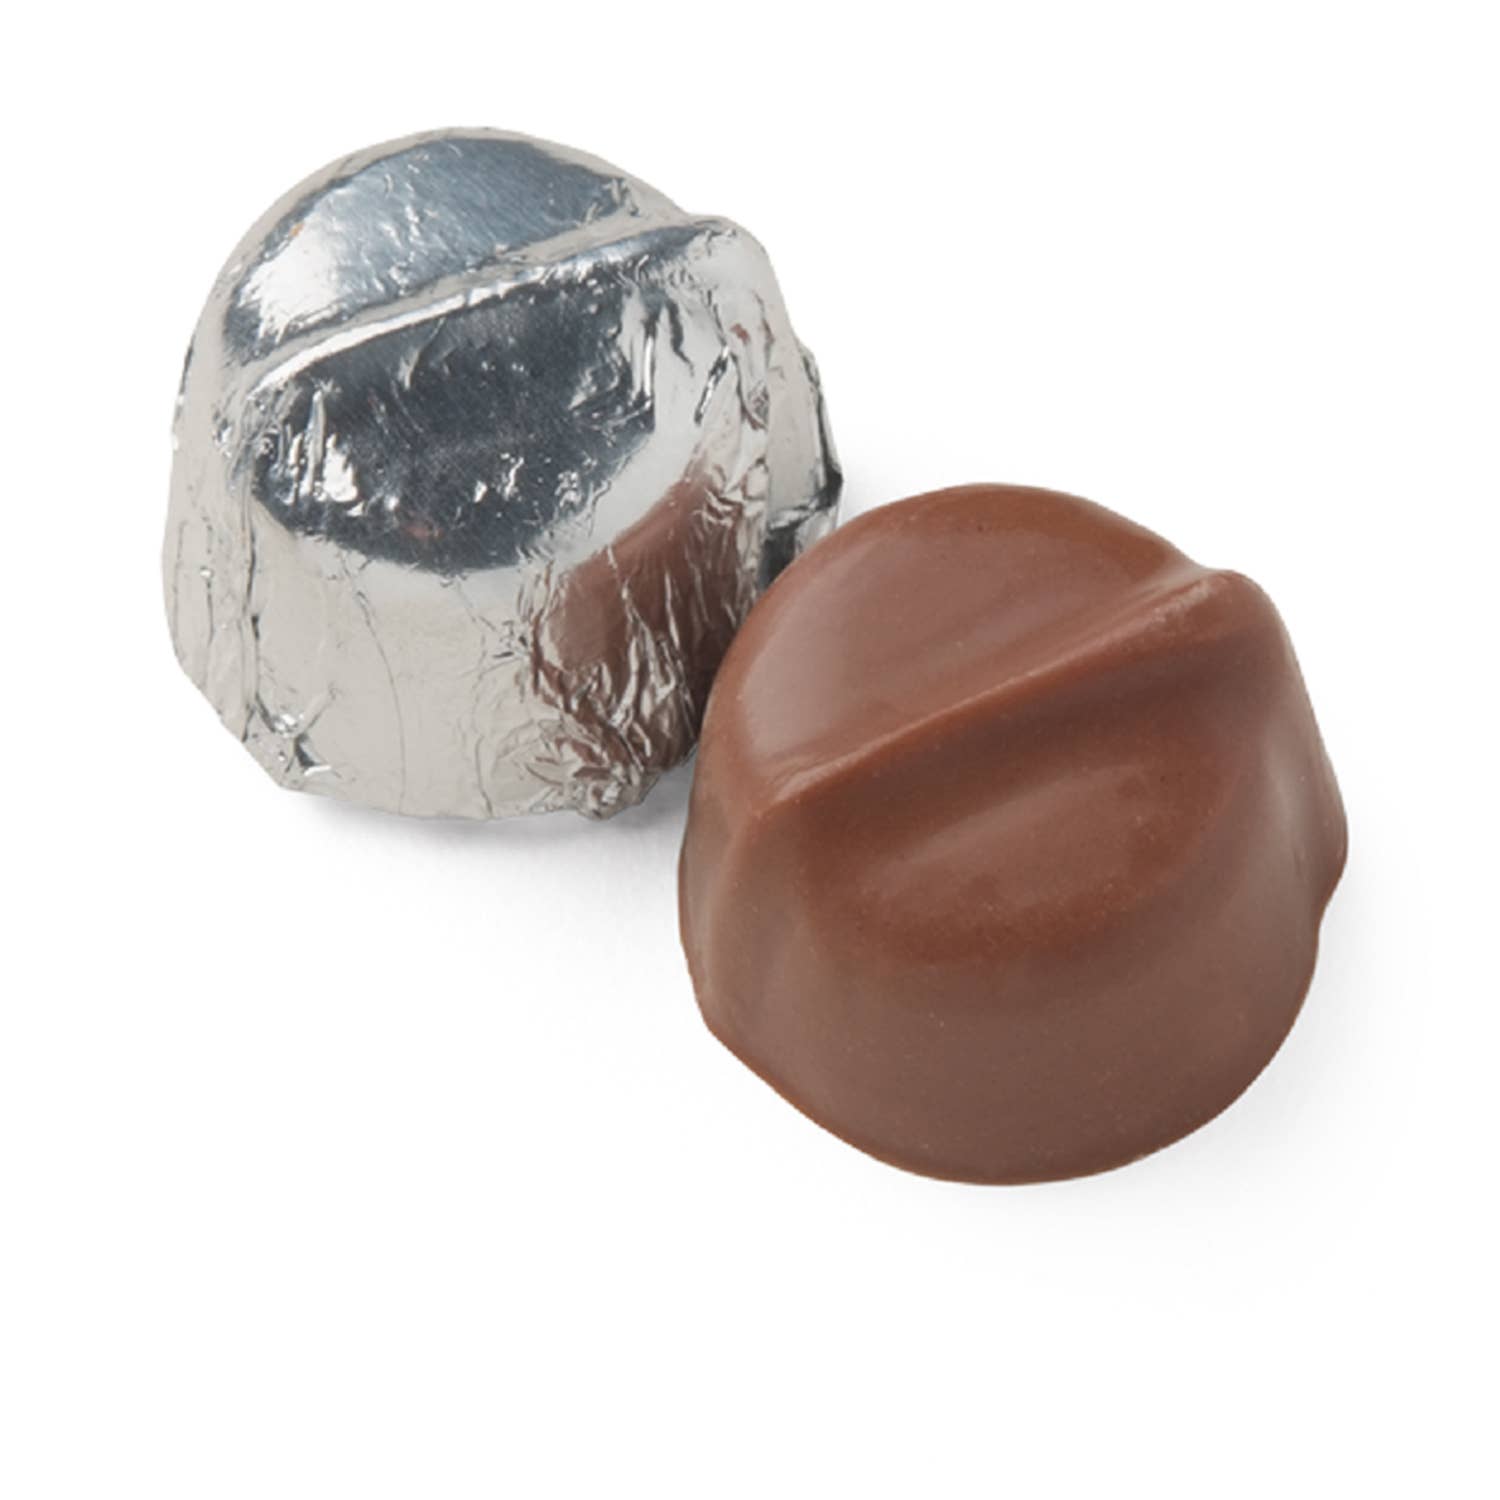 A closeup view of the Vermont Nut Free Milk Chocolate Foiled Drops